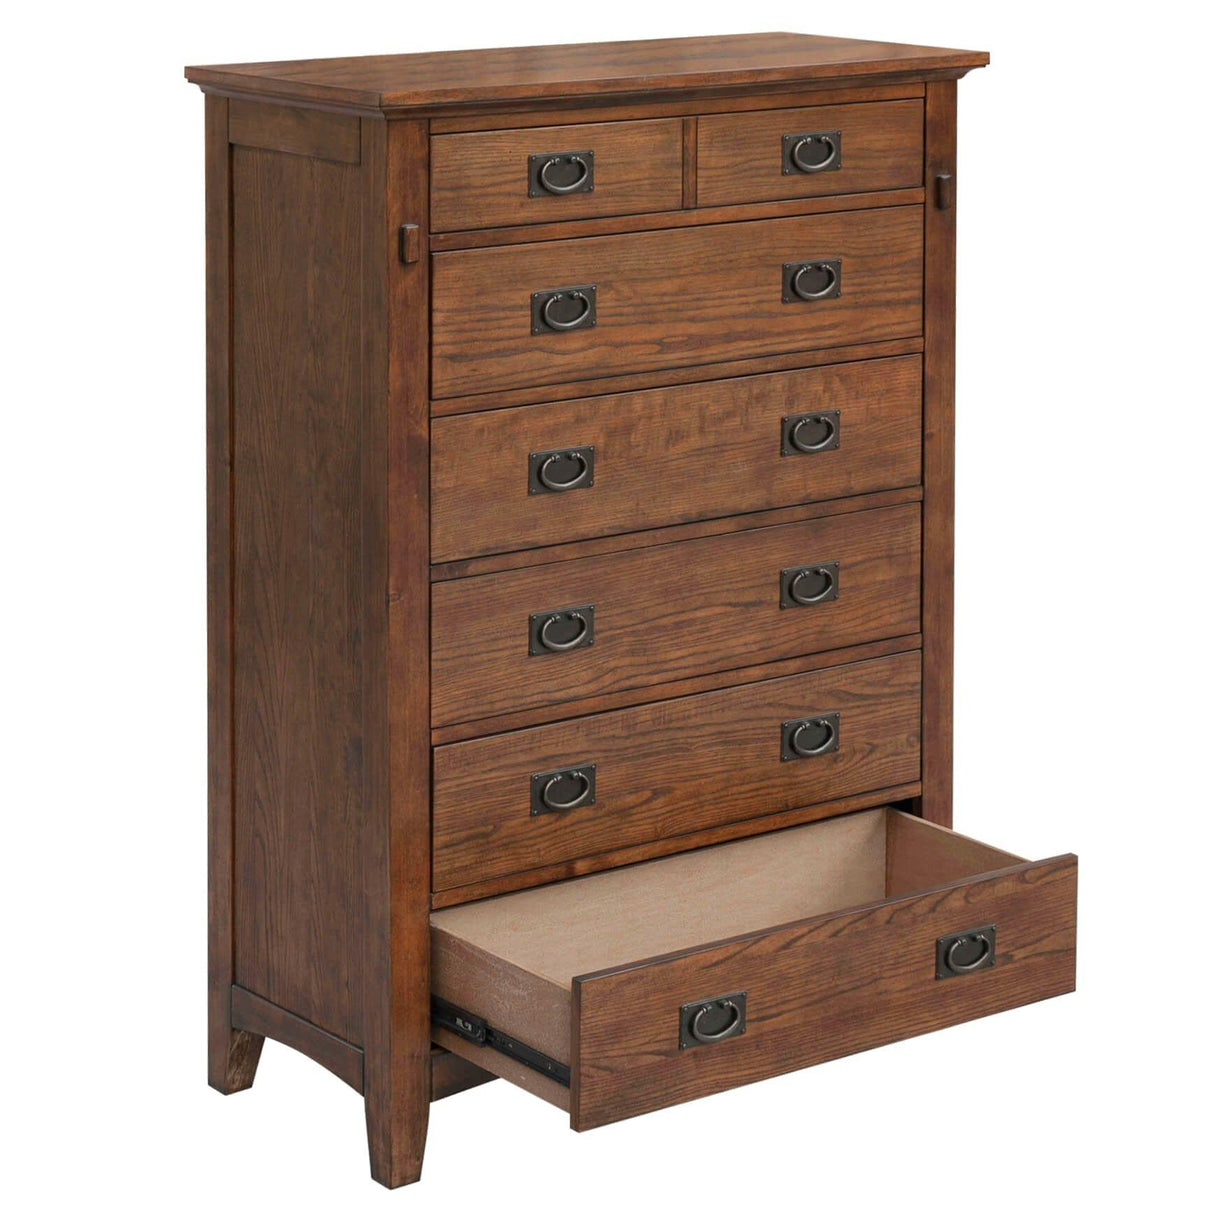 Sunset Trading Mission Bay 5 Piece Queen Bedroom Set | Amish Brown Solid Wood | Panel Bed Dresser Mirror Chest Nightstand CF-4901-0877-Q5P - Bedroom Depot USA